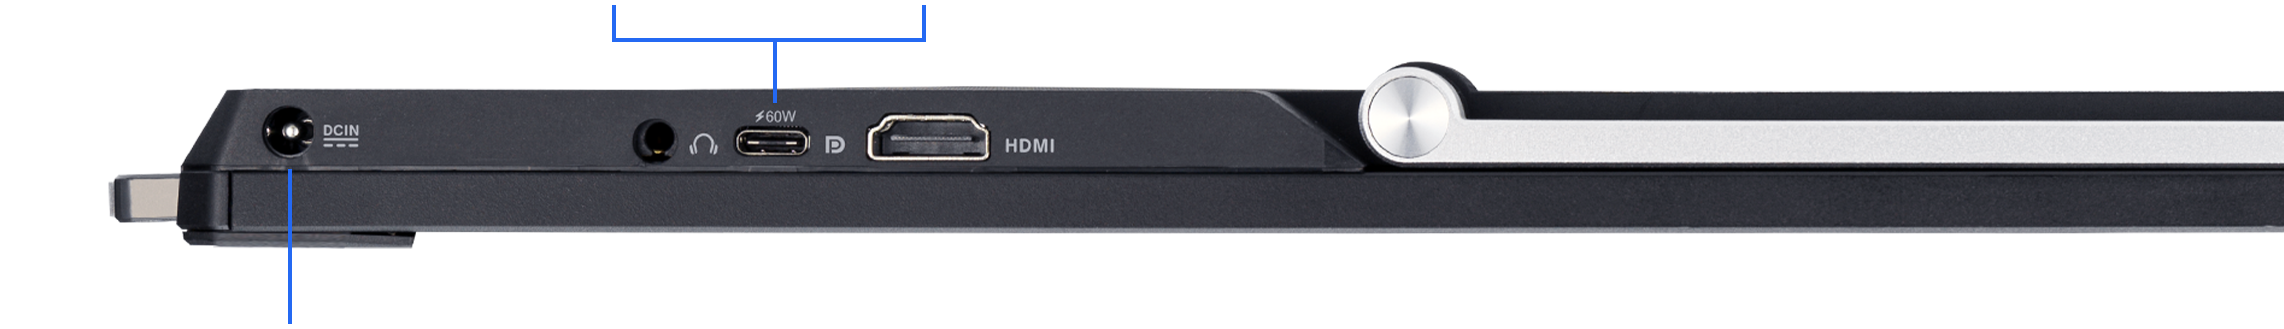 I/O ports with one USB-C with 60-watt power delivery, and HDMI® and an earphone jack